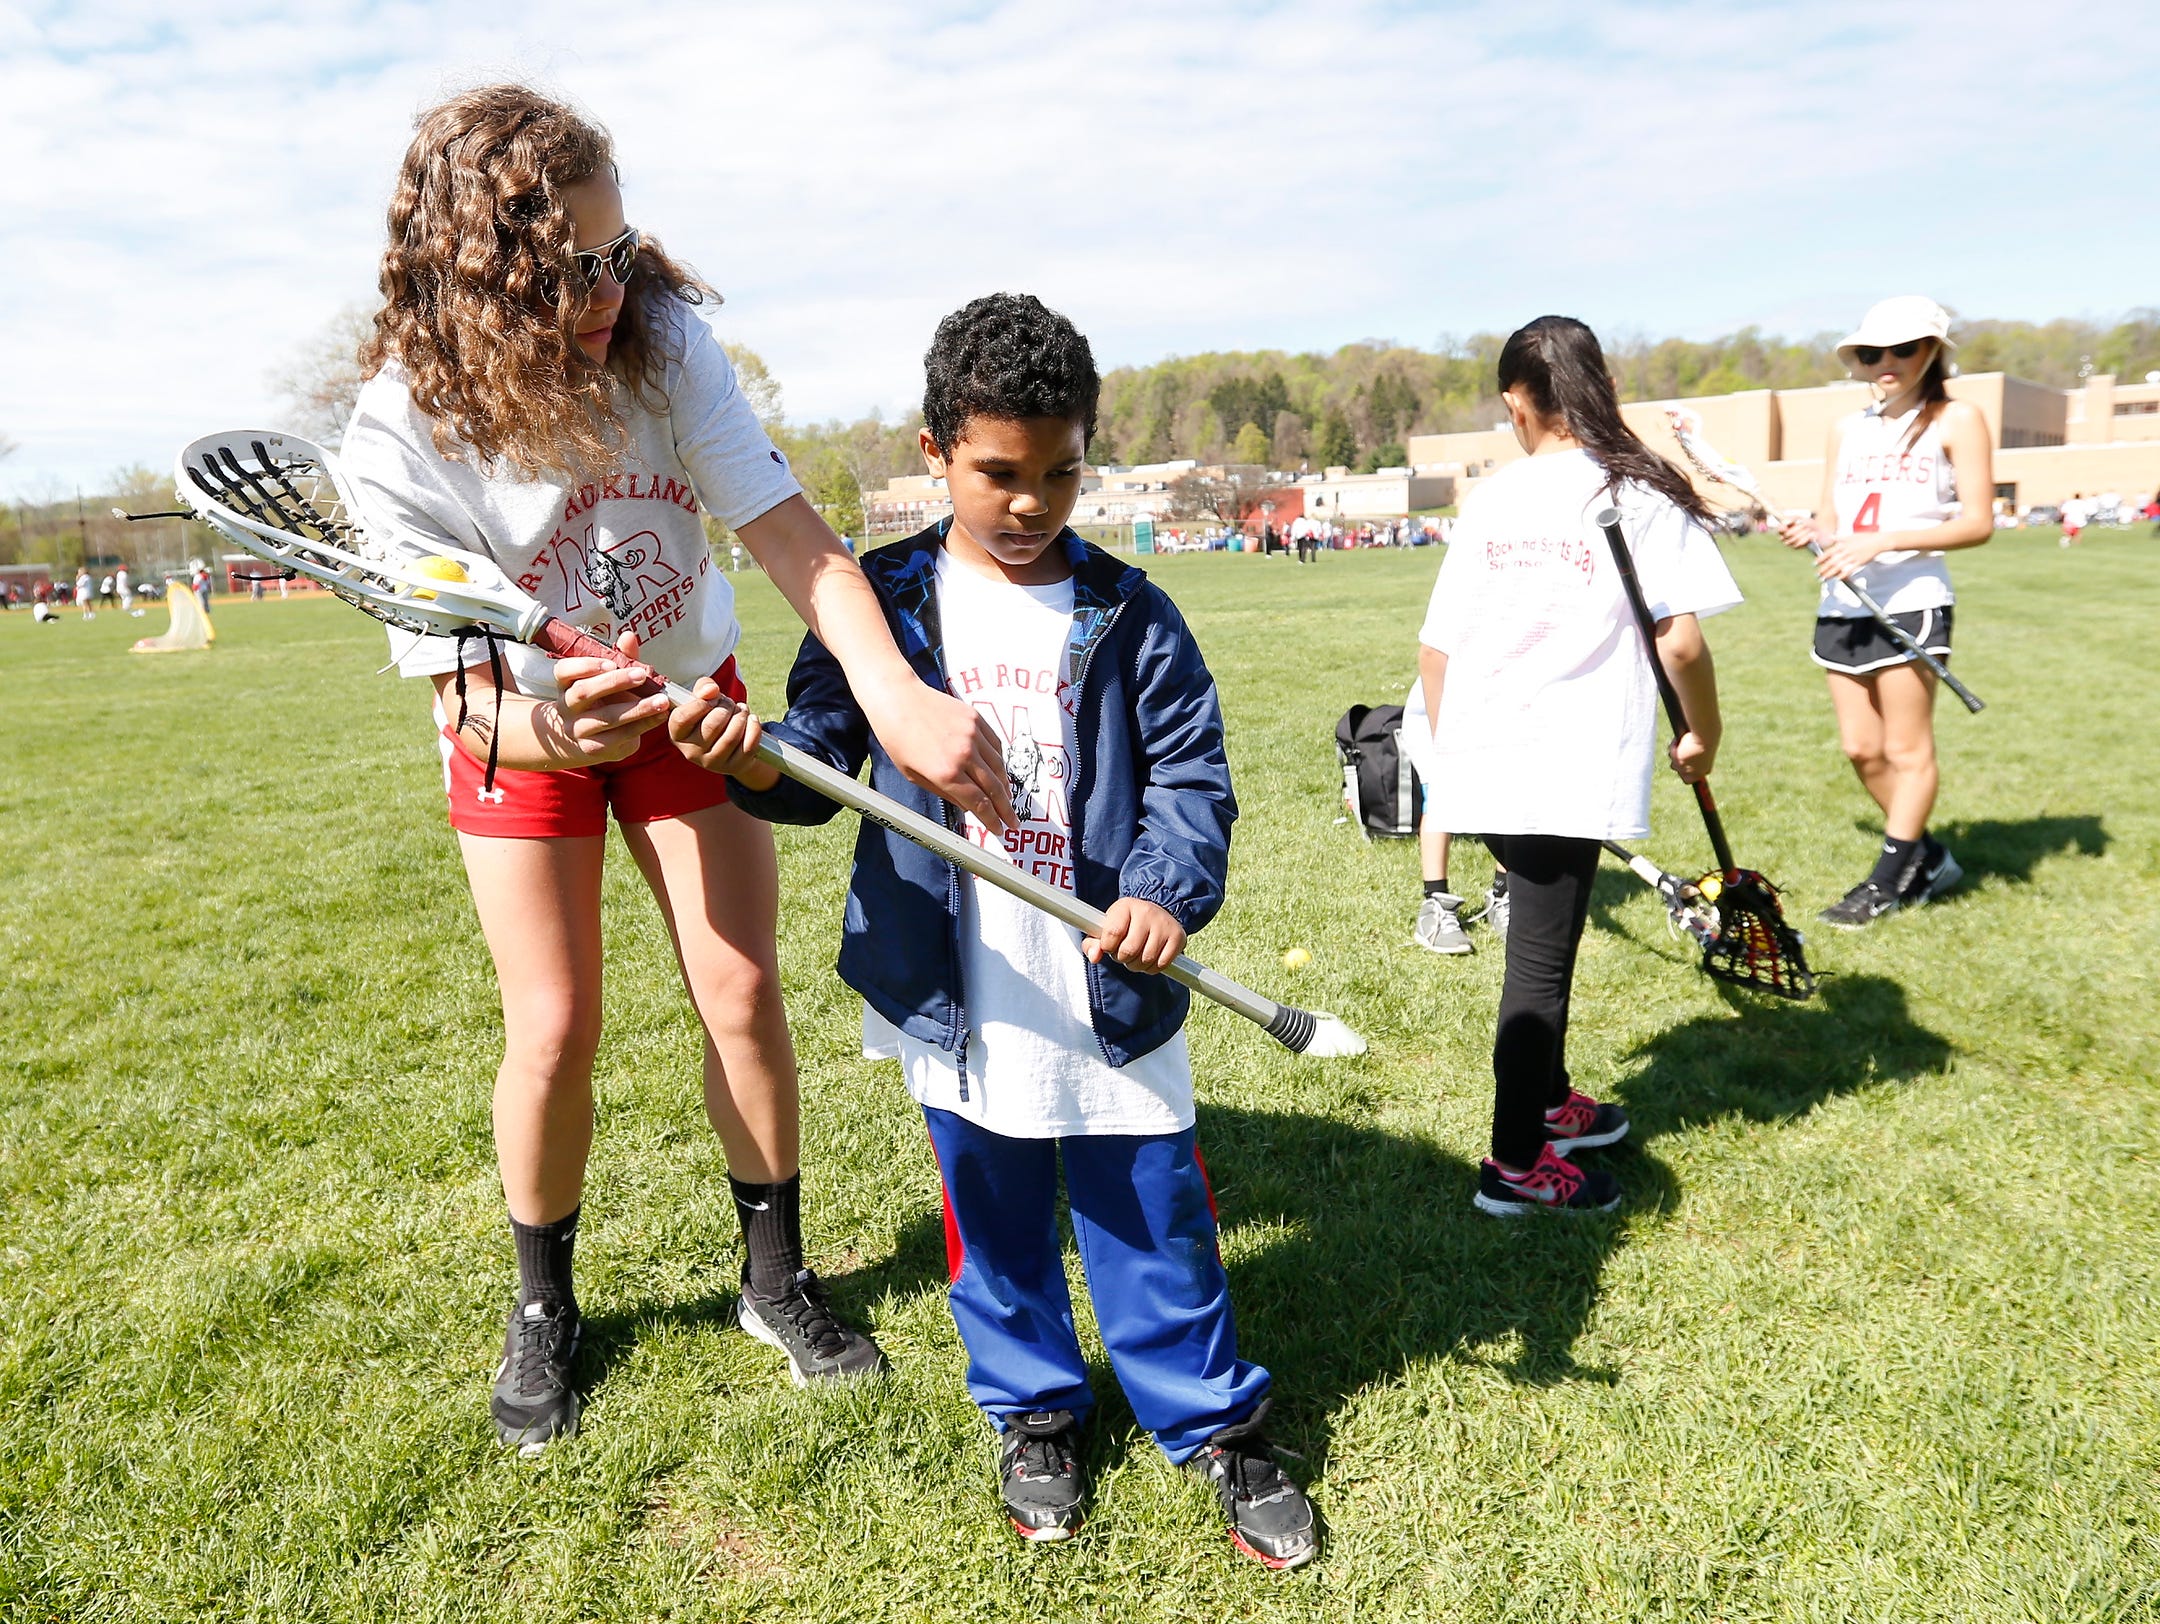 Junior varsity lacrosse player, Emily Cooney, left give a shooting lesson to Raymond Hilario-Saverino, 8, at the second annual "Sports Day for Charity" event at North Rockland High School in Thiells on Saturday, April 30, 2016.